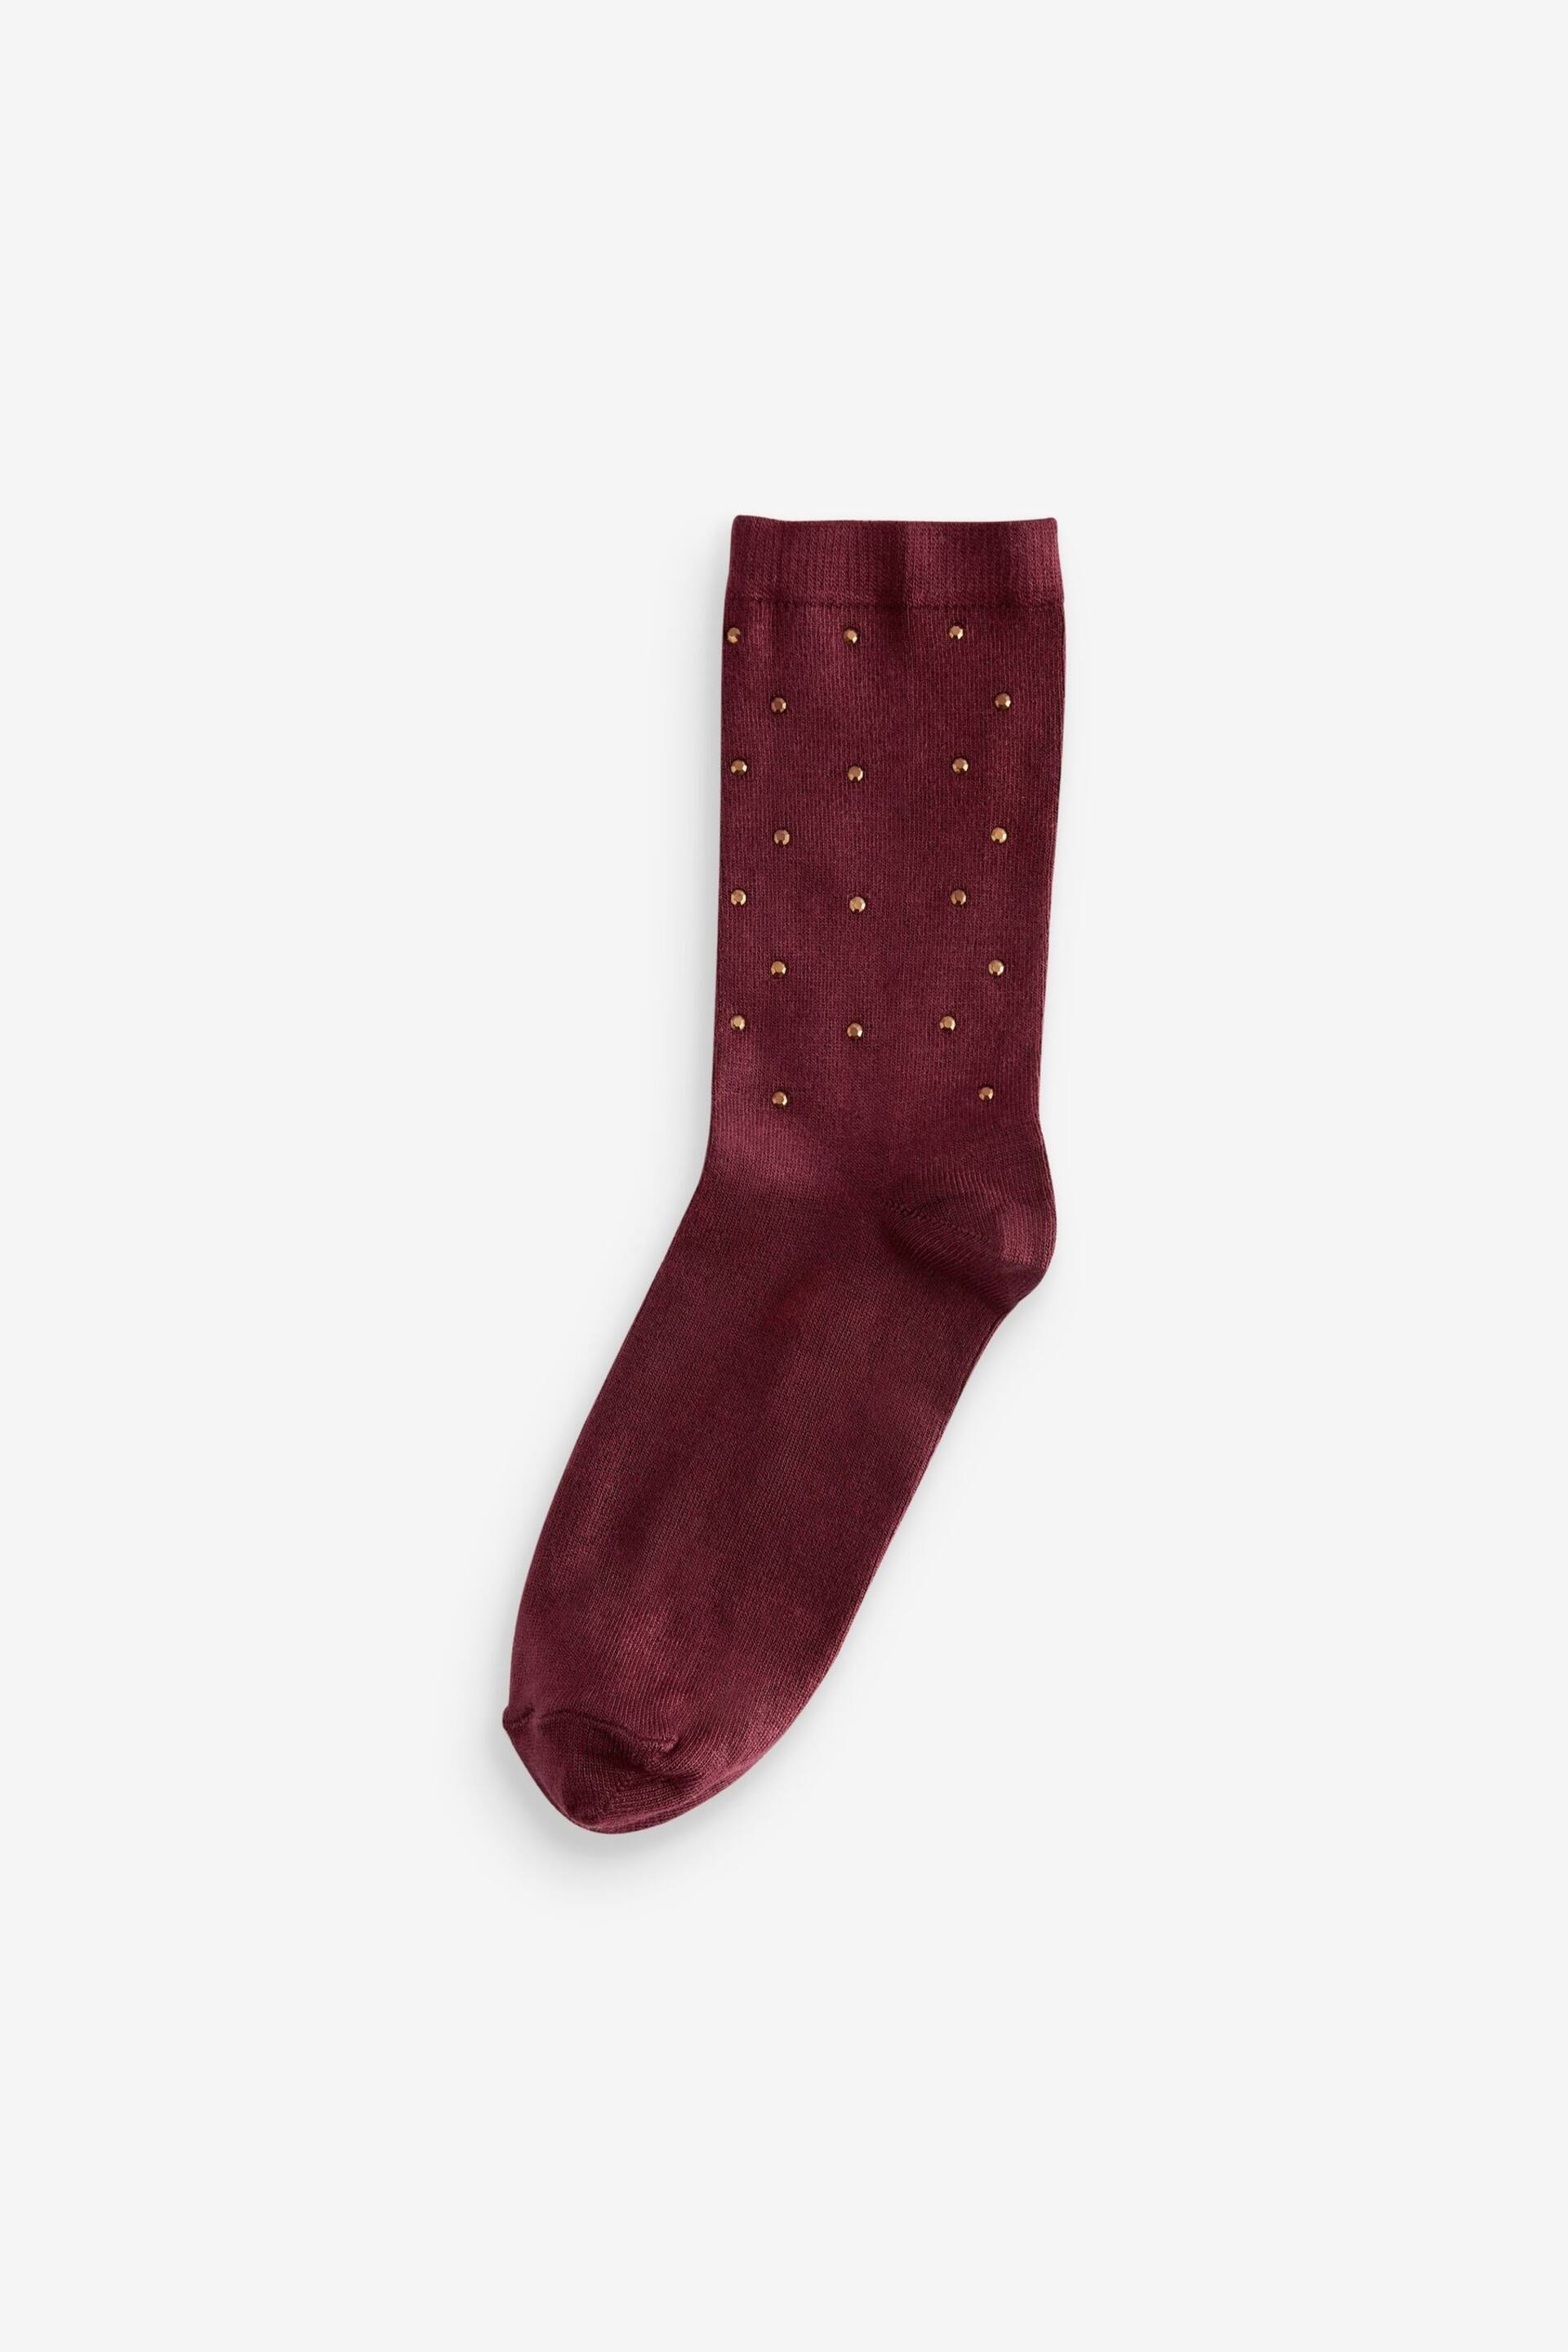 Berry Red Gem Ankle Socks In Box - Image 1 of 3